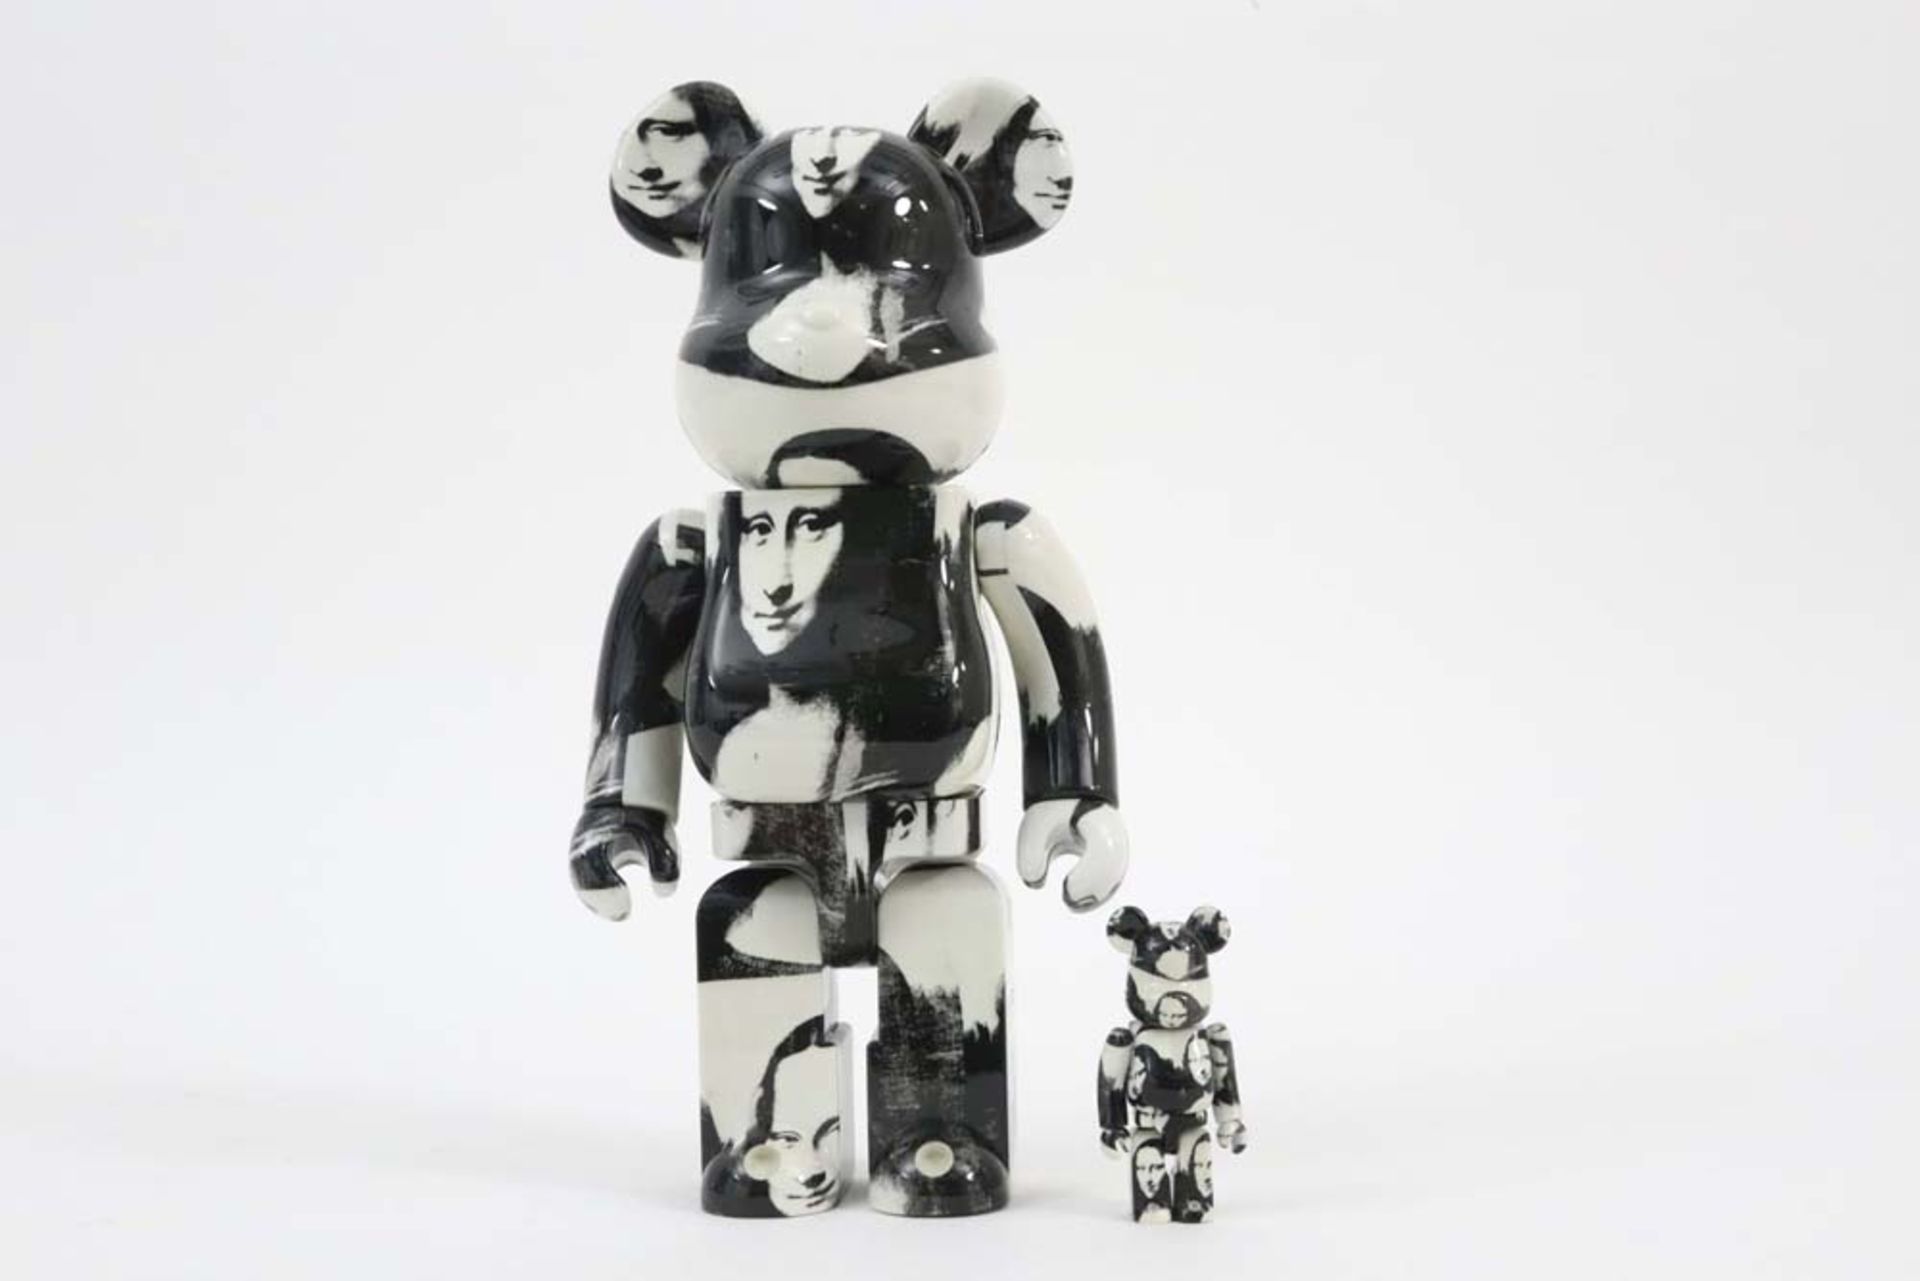 Bearbrick set of small and bigger sculpture after the double Mona Lisa" print by Andy Warhol - - Bild 2 aus 6